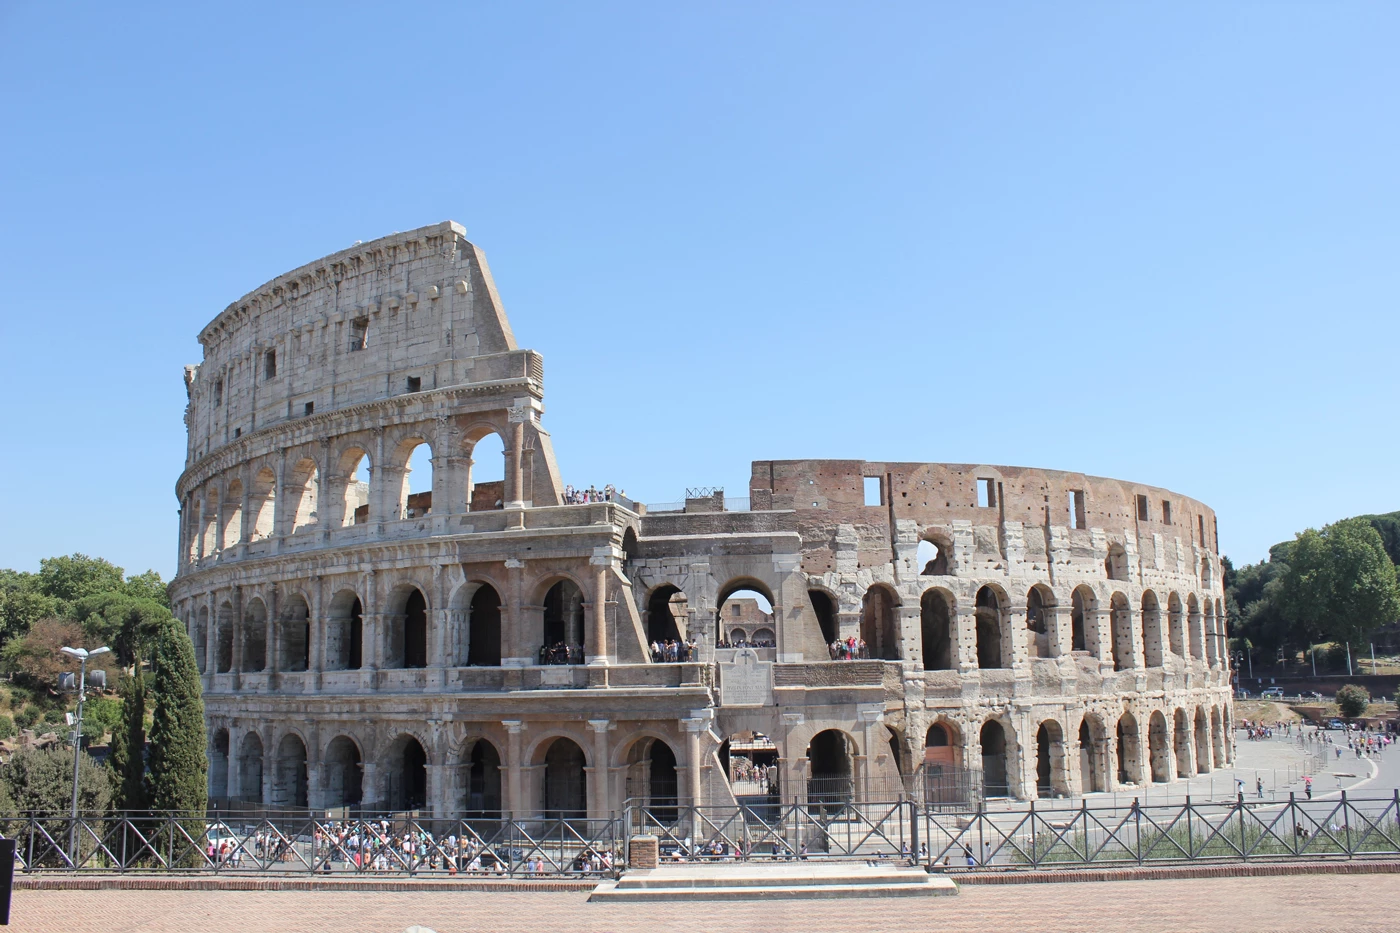 The Roman Colosseum on a sunny day with many tourists looking round it